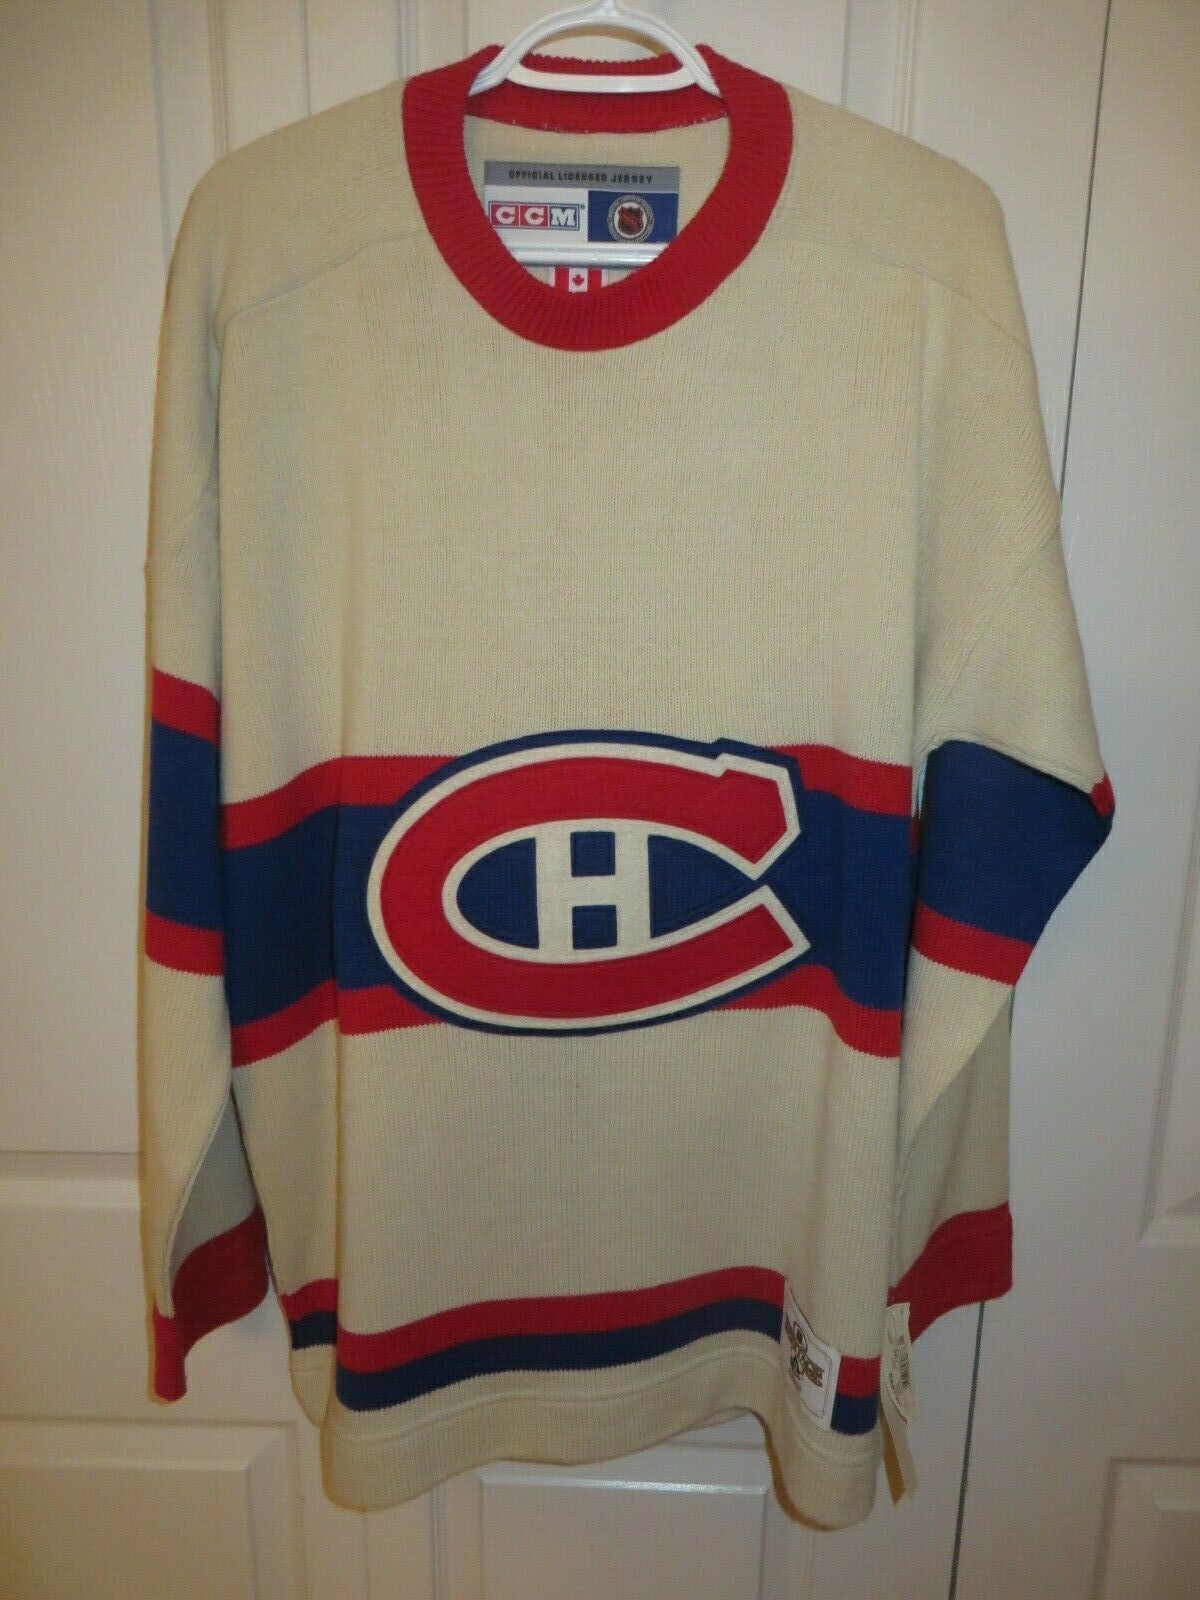 CCM NHL Heritage Collection of jerseys – Part 2 of 2 | Heritage ...